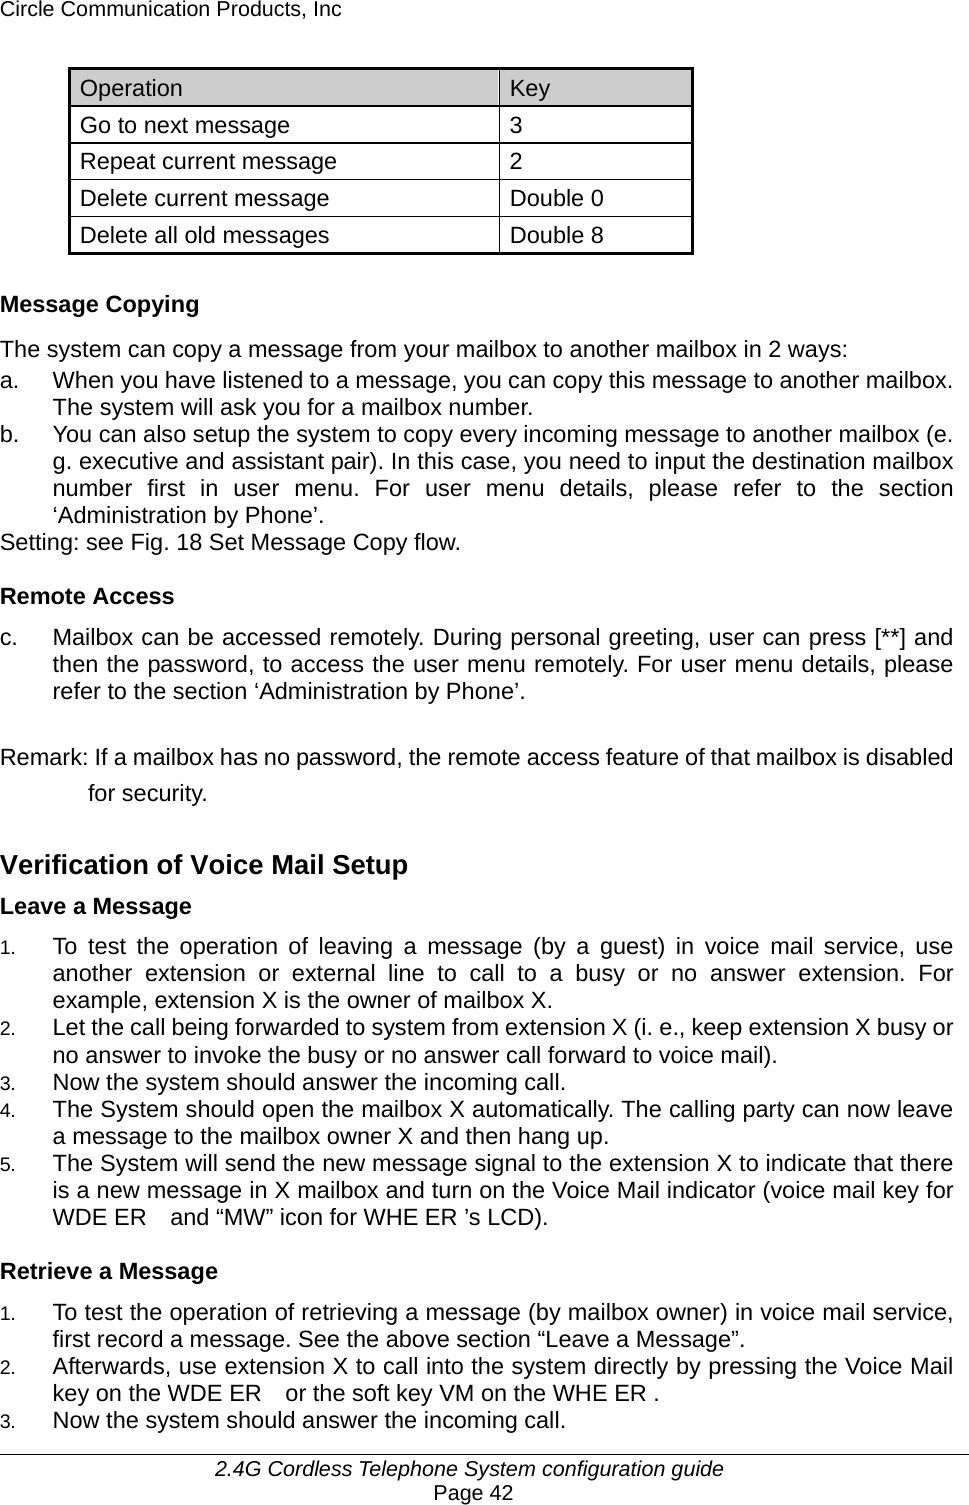 Circle Communication Products, Inc     2.4G Cordless Telephone System configuration guide Page 42 Operation  Key  Go to next message  3 Repeat current message  2 Delete current message  Double 0 Delete all old messages  Double 8  Message Copying The system can copy a message from your mailbox to another mailbox in 2 ways: a.  When you have listened to a message, you can copy this message to another mailbox. The system will ask you for a mailbox number. b.  You can also setup the system to copy every incoming message to another mailbox (e. g. executive and assistant pair). In this case, you need to input the destination mailbox number first in user menu. For user menu details, please refer to the section ‘Administration by Phone’. Setting: see Fig. 18 Set Message Copy flow.  Remote Access c.  Mailbox can be accessed remotely. During personal greeting, user can press [**] and then the password, to access the user menu remotely. For user menu details, please refer to the section ‘Administration by Phone’.  Remark: If a mailbox has no password, the remote access feature of that mailbox is disabled for security.  Verification of Voice Mail Setup Leave a Message 1.   To test the operation of leaving a message (by a guest) in voice mail service, use another extension or external line to call to a busy or no answer extension. For example, extension X is the owner of mailbox X. 2.   Let the call being forwarded to system from extension X (i. e., keep extension X busy or no answer to invoke the busy or no answer call forward to voice mail). 3.   Now the system should answer the incoming call. 4.   The System should open the mailbox X automatically. The calling party can now leave a message to the mailbox owner X and then hang up. 5.   The System will send the new message signal to the extension X to indicate that there is a new message in X mailbox and turn on the Voice Mail indicator (voice mail key for WDE ER    and “MW” icon for WHE ER ’s LCD).  Retrieve a Message 1.   To test the operation of retrieving a message (by mailbox owner) in voice mail service, first record a message. See the above section “Leave a Message”. 2.   Afterwards, use extension X to call into the system directly by pressing the Voice Mail key on the WDE ER    or the soft key VM on the WHE ER . 3.   Now the system should answer the incoming call. 